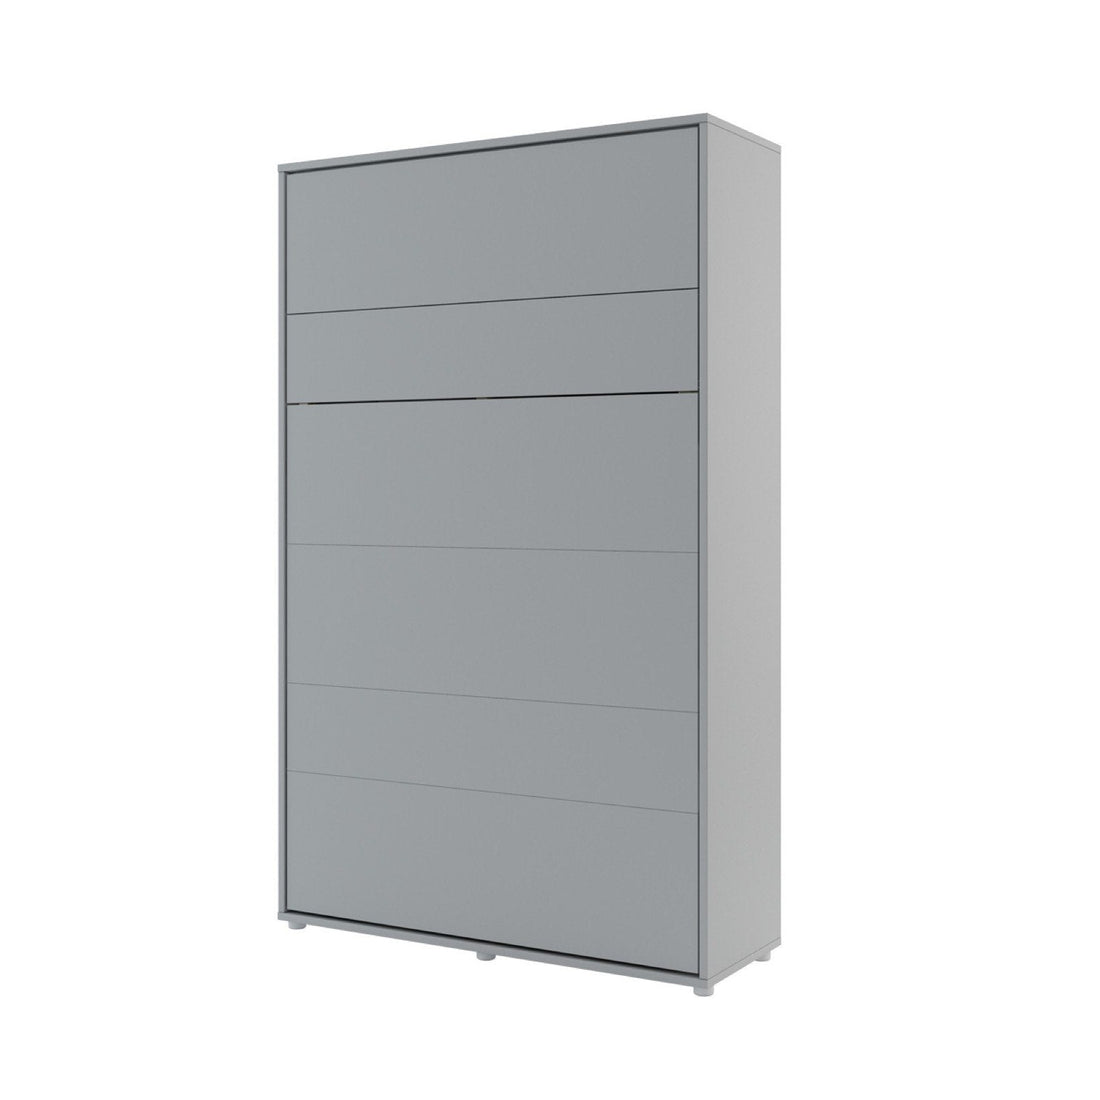 BC-02 Vertical Wall Bed Concept 120cm - £865.8 - Wall Bed 